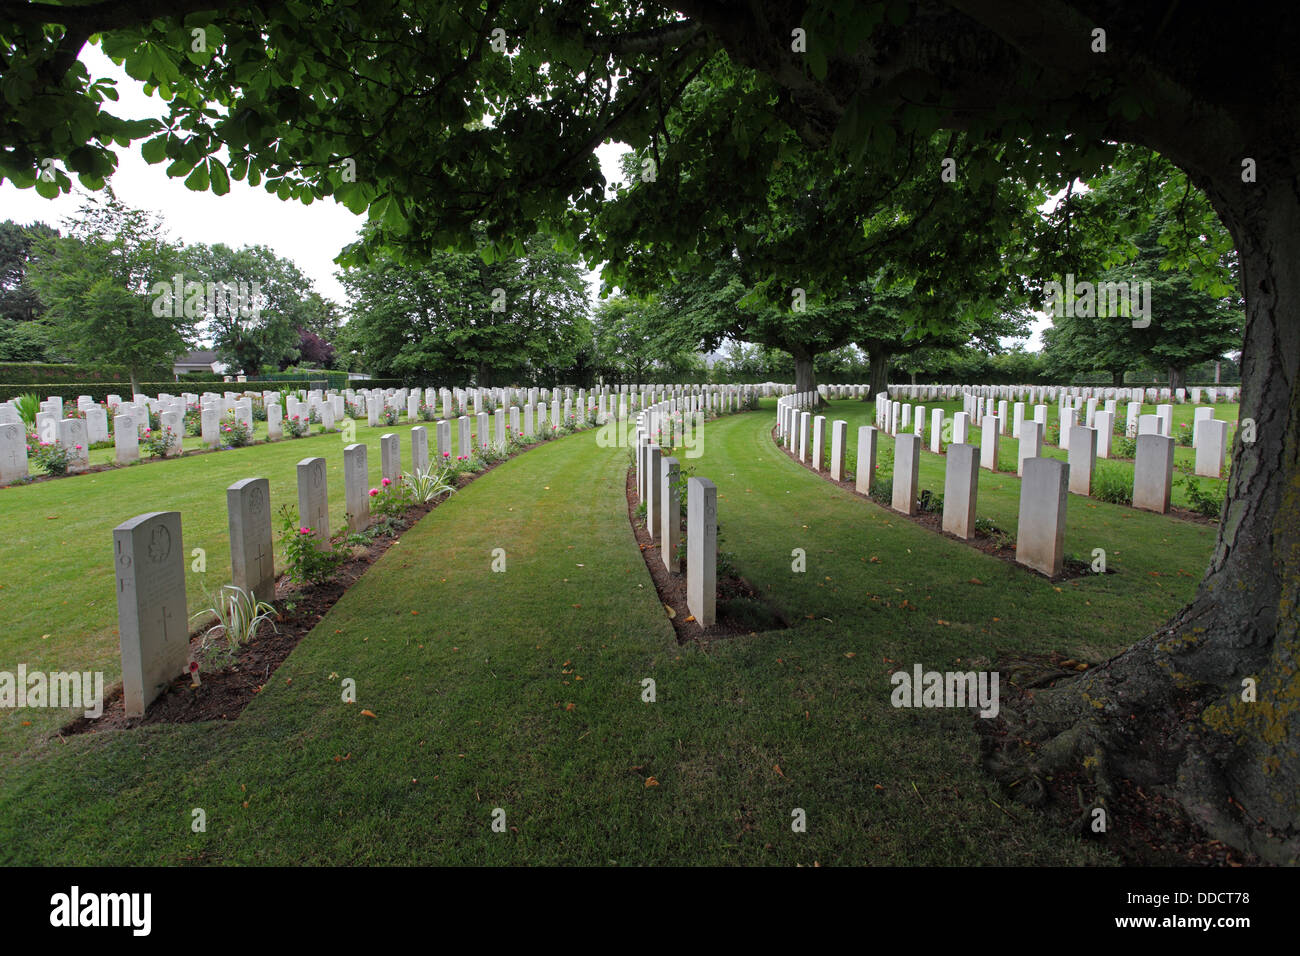 Ranks of Gravestones in a curve under trees in the British cemetery, Bayeux, Normandy France Stock Photo